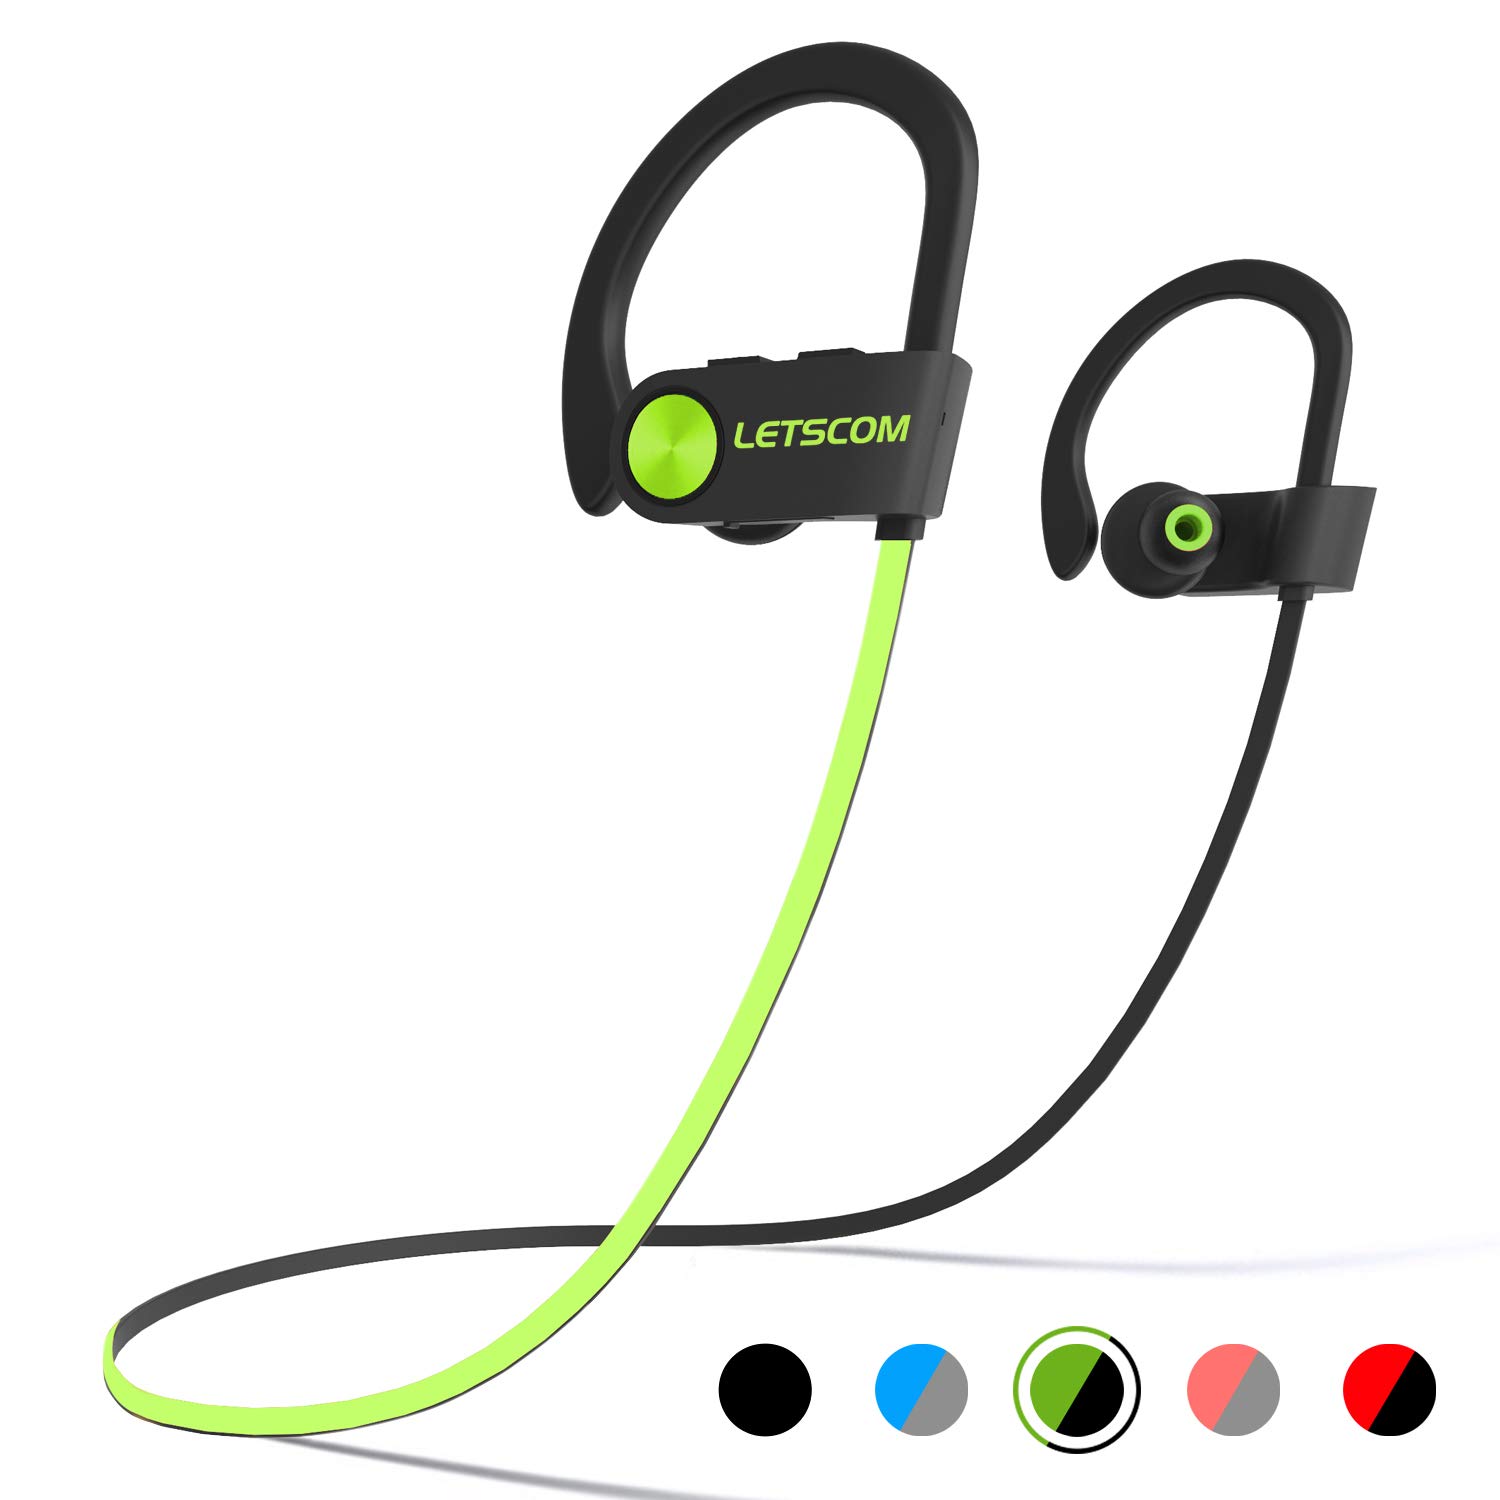 Richer Bass & HiFi Stereo Sports Earphones 8 Hours Playtime Running Headphones with Travel Case LETSCOM Wireless Earbuds IPX7 Waterproof Noise Cancelling Headsets Bluetooth Headphones